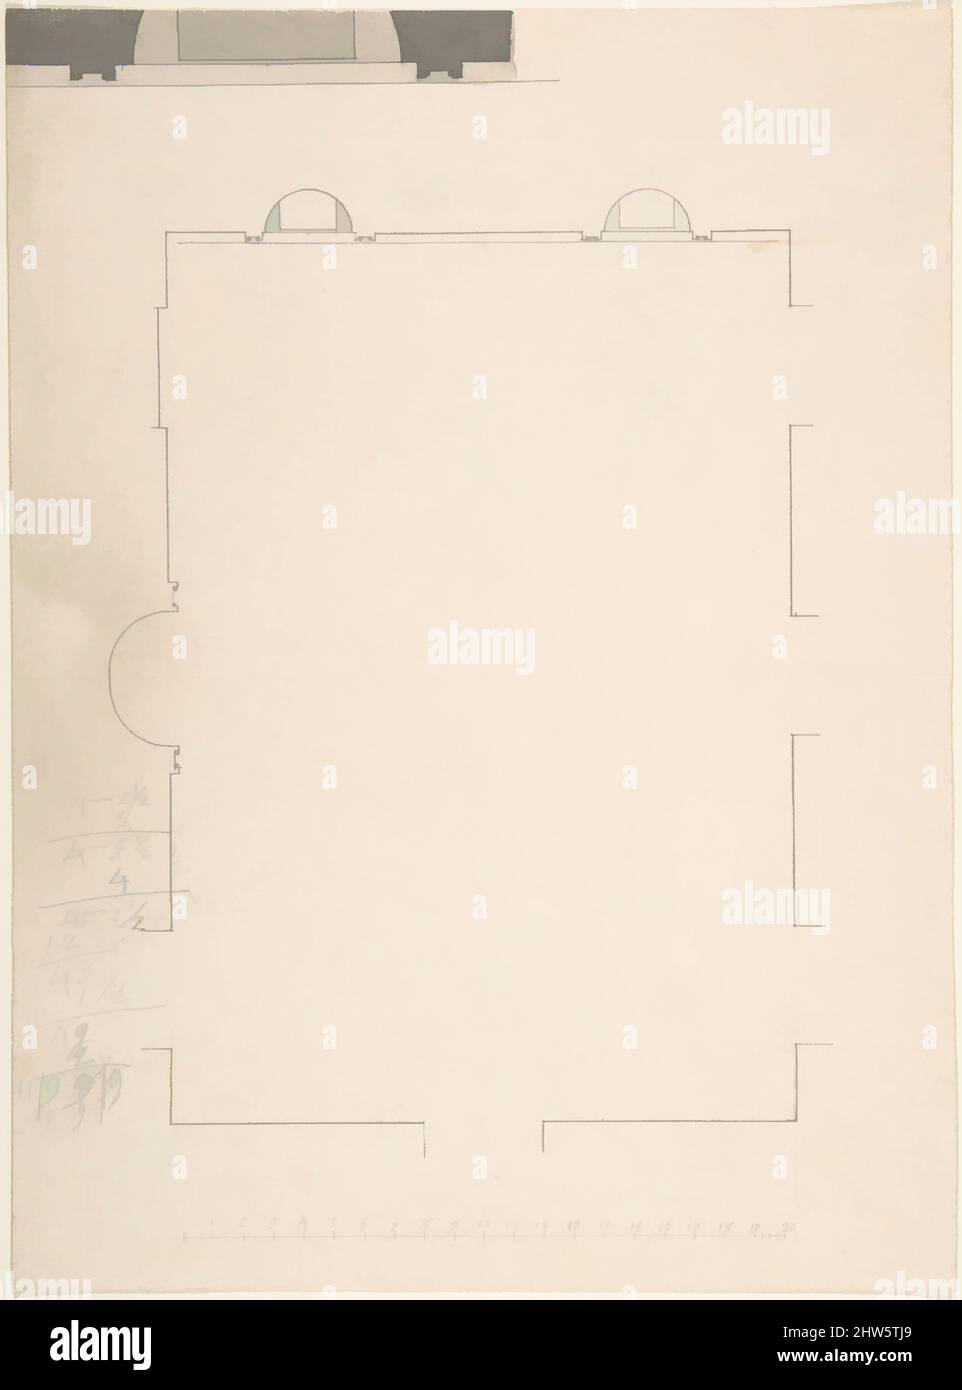 Art inspired by Plan of large room with three niches, 18th century, Pen and ink, sheet: 11 x 8 1/4 in. (27.9 x 21 cm), Anonymous, British, 18th century, Classic works modernized by Artotop with a splash of modernity. Shapes, color and value, eye-catching visual impact on art. Emotions through freedom of artworks in a contemporary way. A timeless message pursuing a wildly creative new direction. Artists turning to the digital medium and creating the Artotop NFT Stock Photo